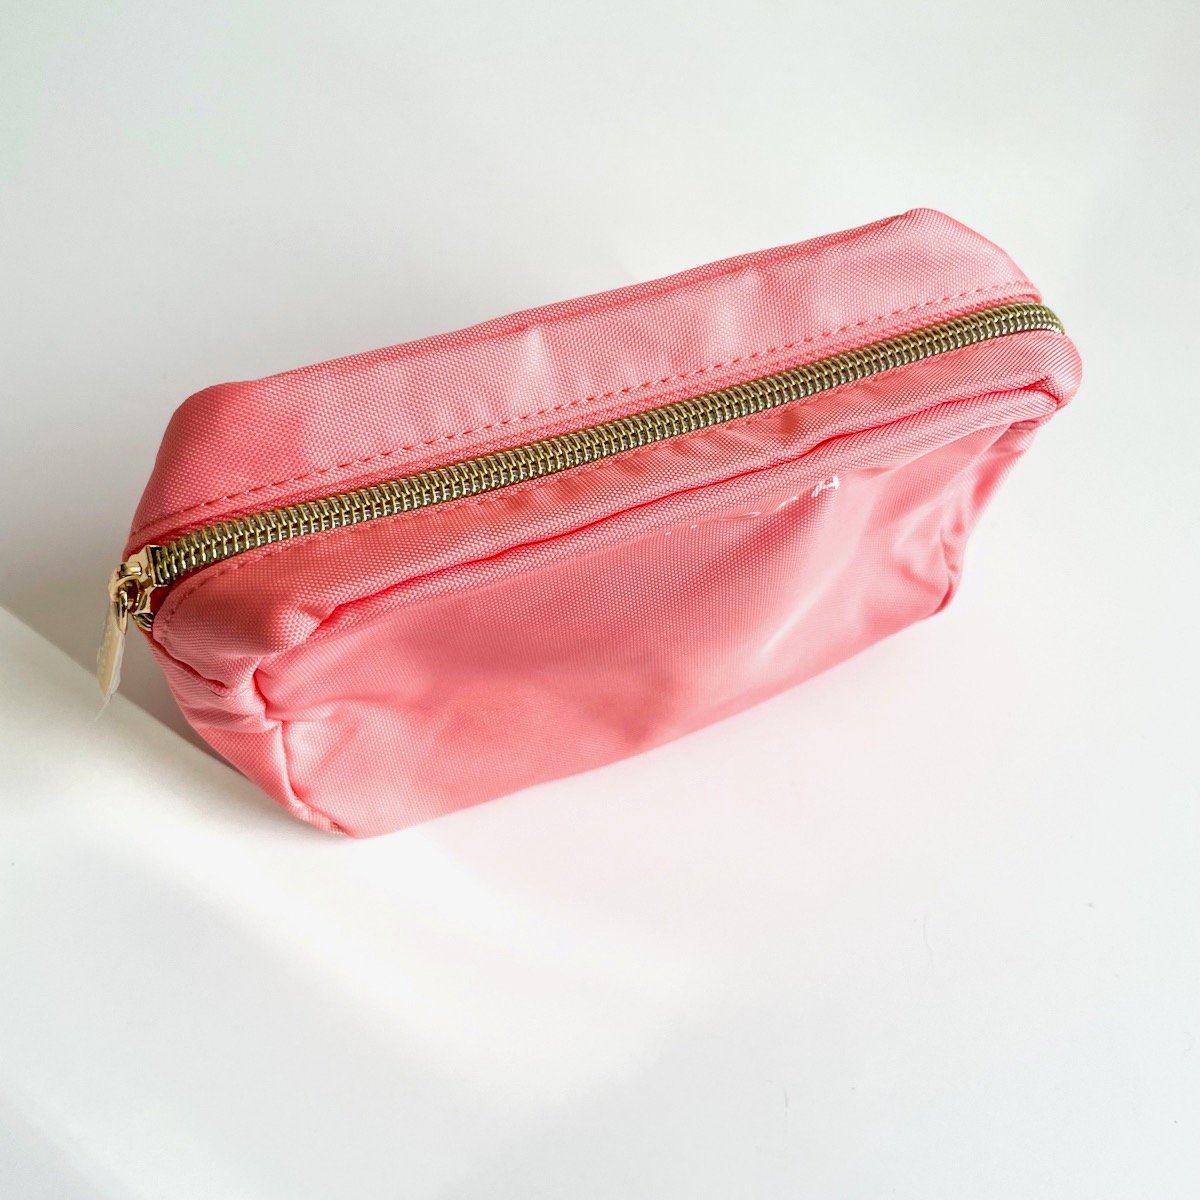 pink makeup bag on white background, alternate view